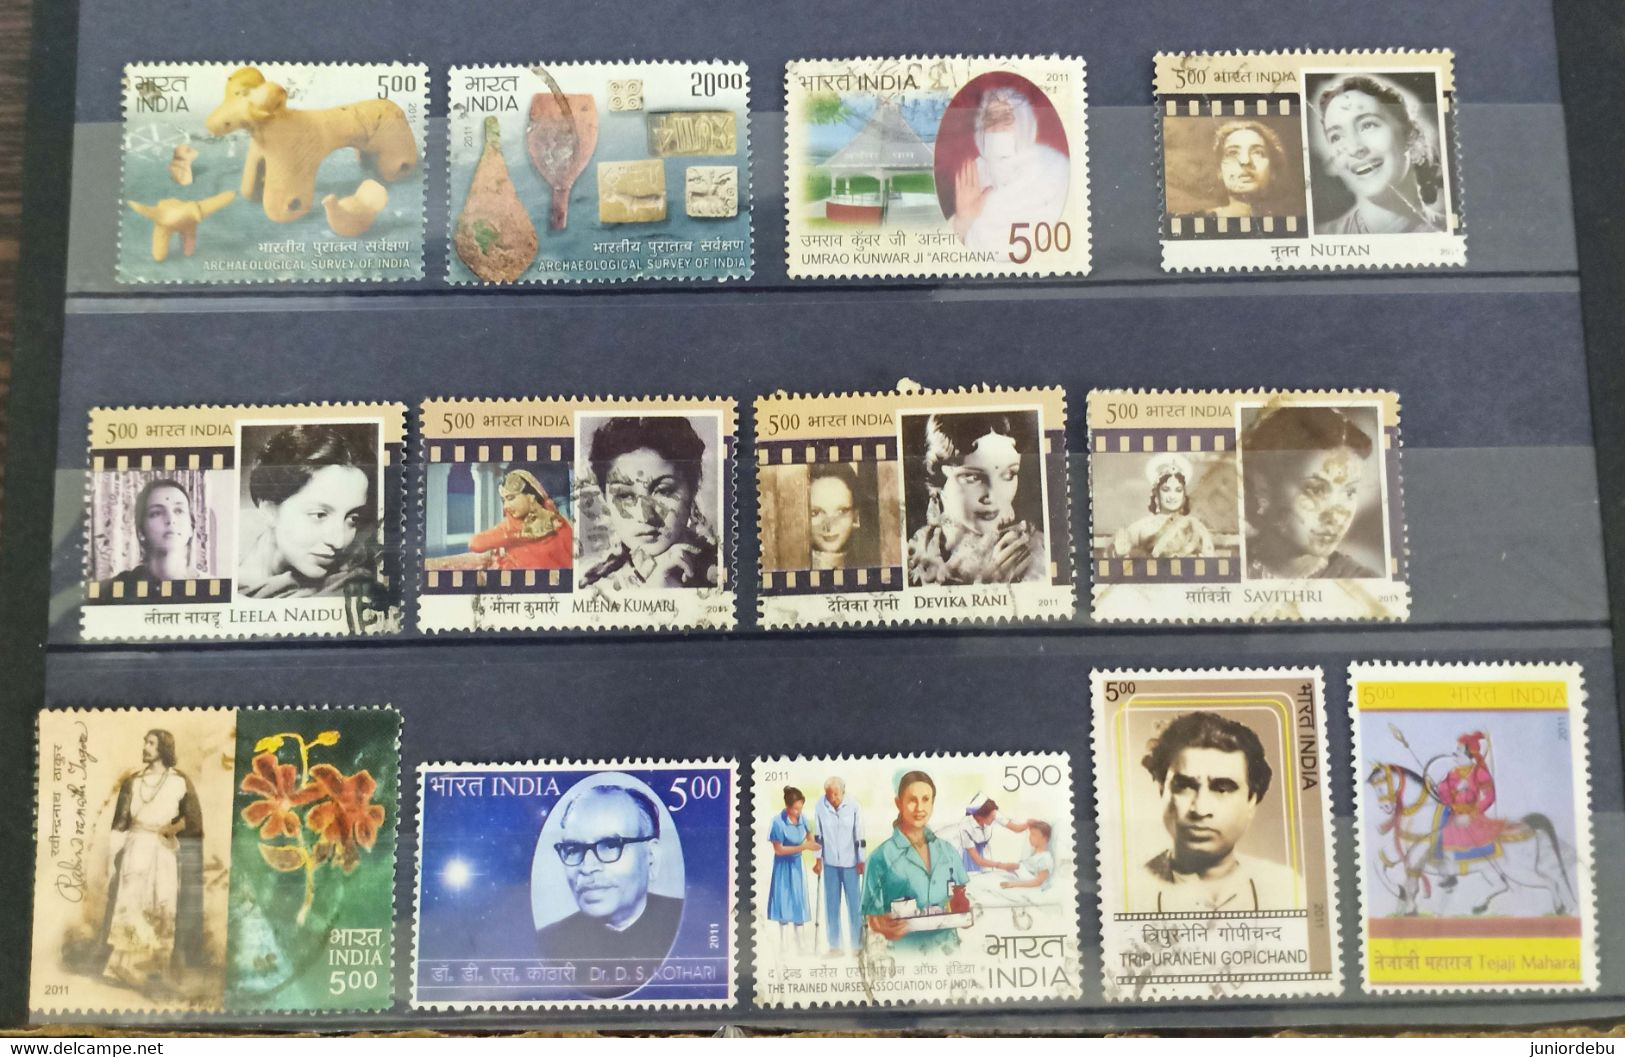 India  - 2011 - 13 Diff Commemorative Stamps   -  Nice  Selection - Used. ( CP 52 ) - Gebruikt